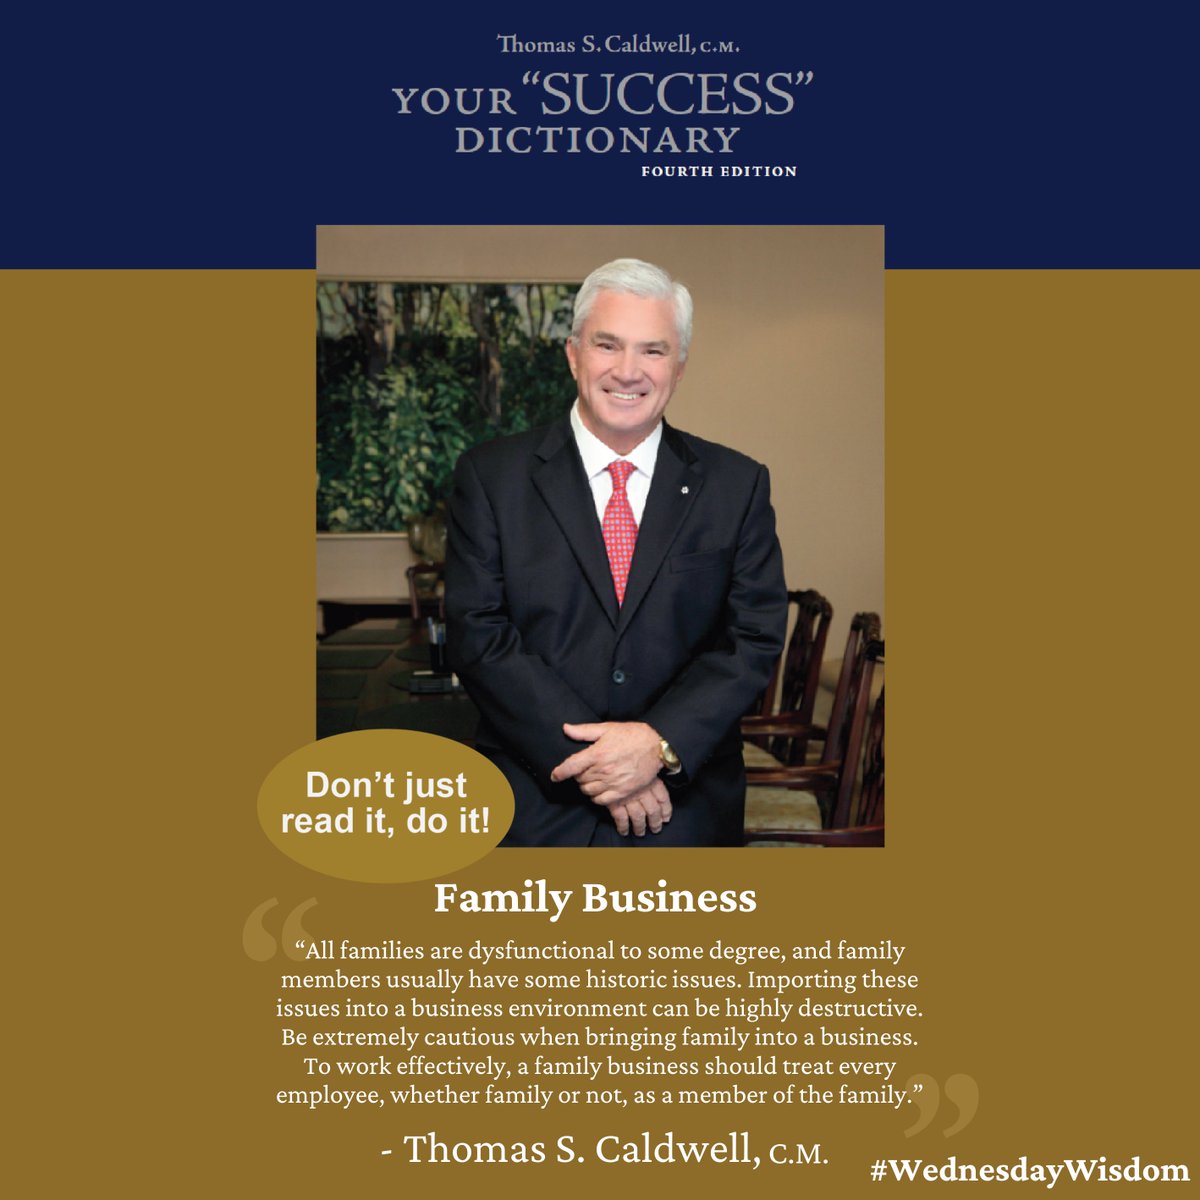 Your #WednesdayWisdom word of the day – Family Business

#YourSuccessDictionary #ThomasSCaldwell #Wednesday #Wisdom #Inspiration #Success #SuccessDictionary